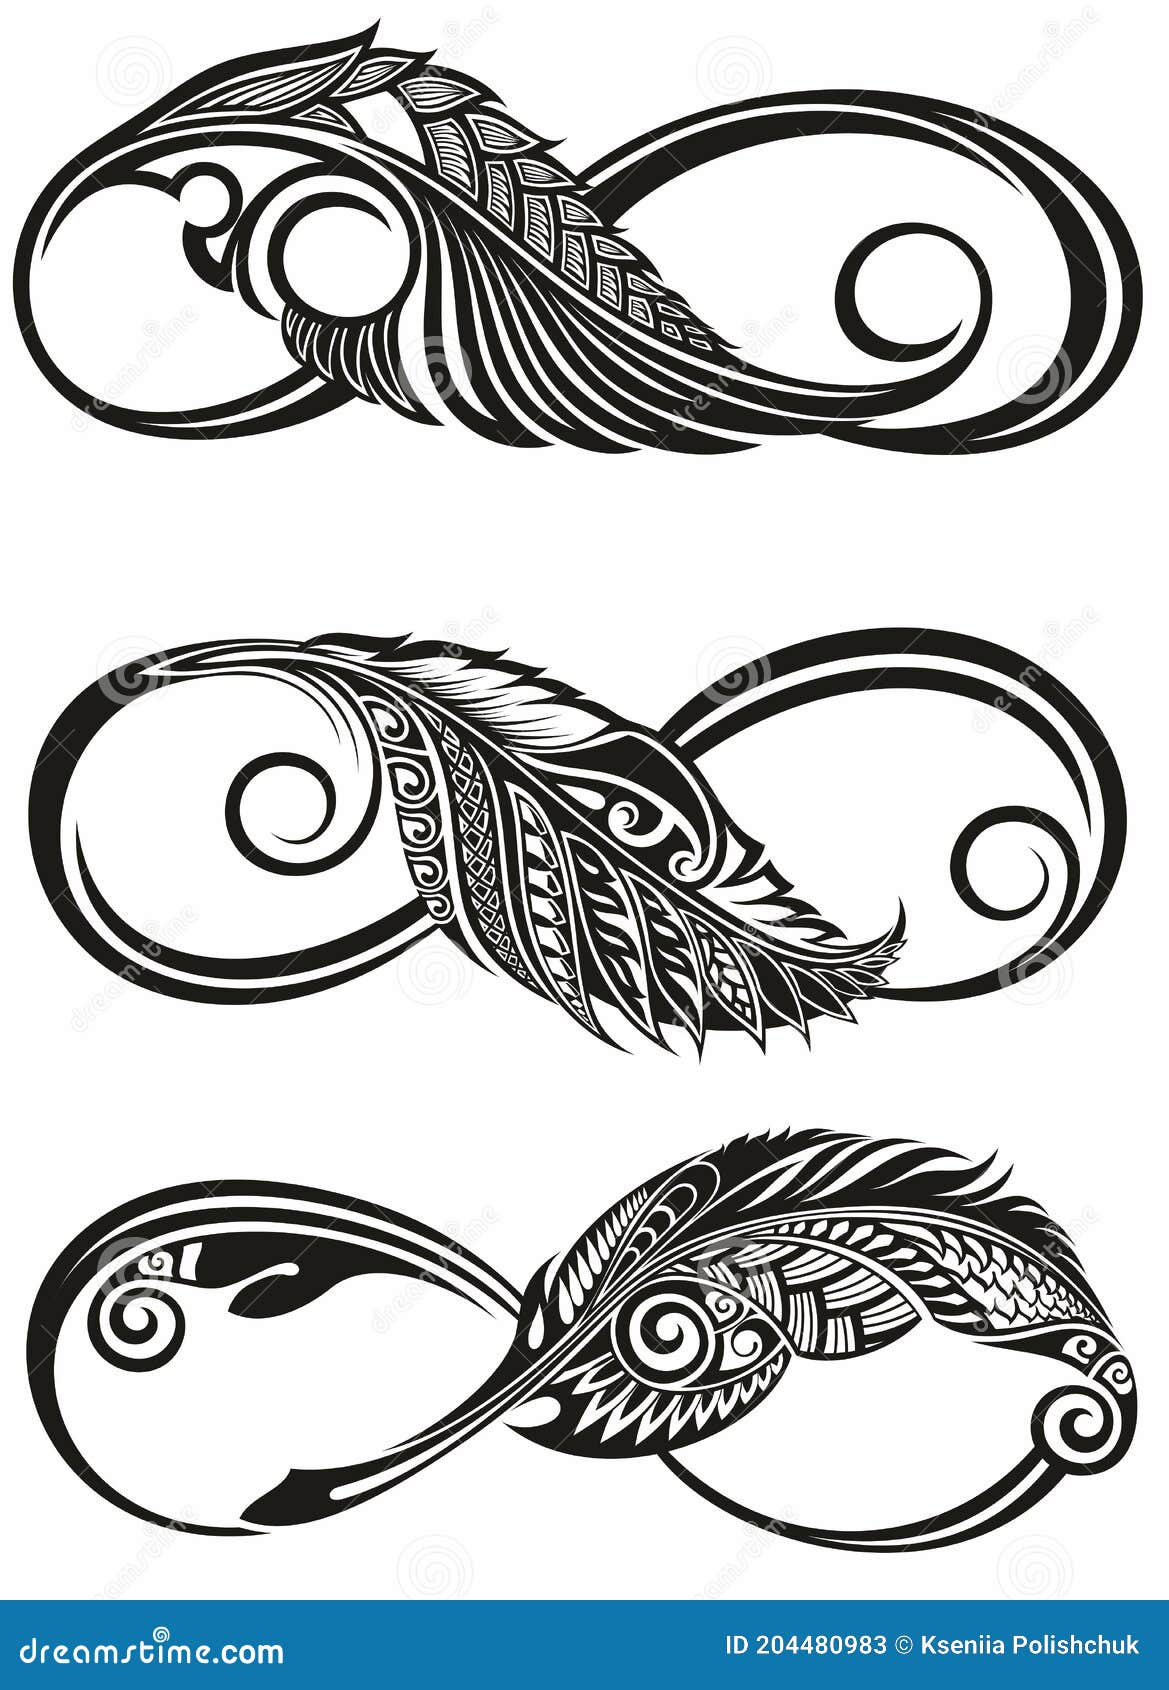 Infinity #Feather Tattoo The two... - Danish Tattooz House | Facebook